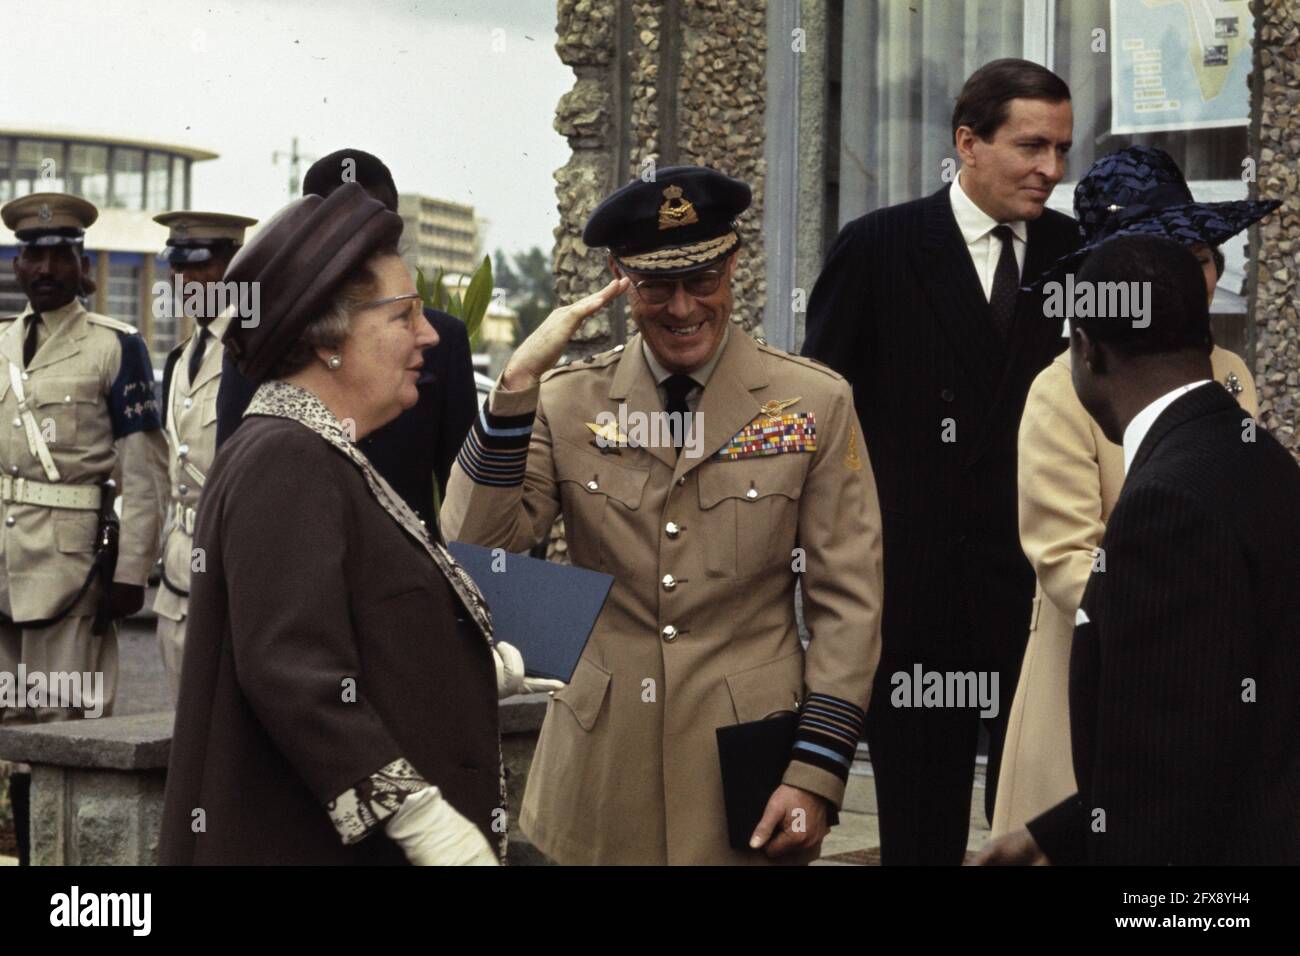 Visit of Queen Juliana, Princes Bernhard and Claus and Princess Beatrix to Ethiopia. Here the company visits Africa Hall in Addis Ababa, January 31, 1969, royal visits, state visits, The Netherlands, 20th century press agency photo, news to remember, documentary, historic photography 1945-1990, visual stories, human history of the Twentieth Century, capturing moments in time Stock Photo